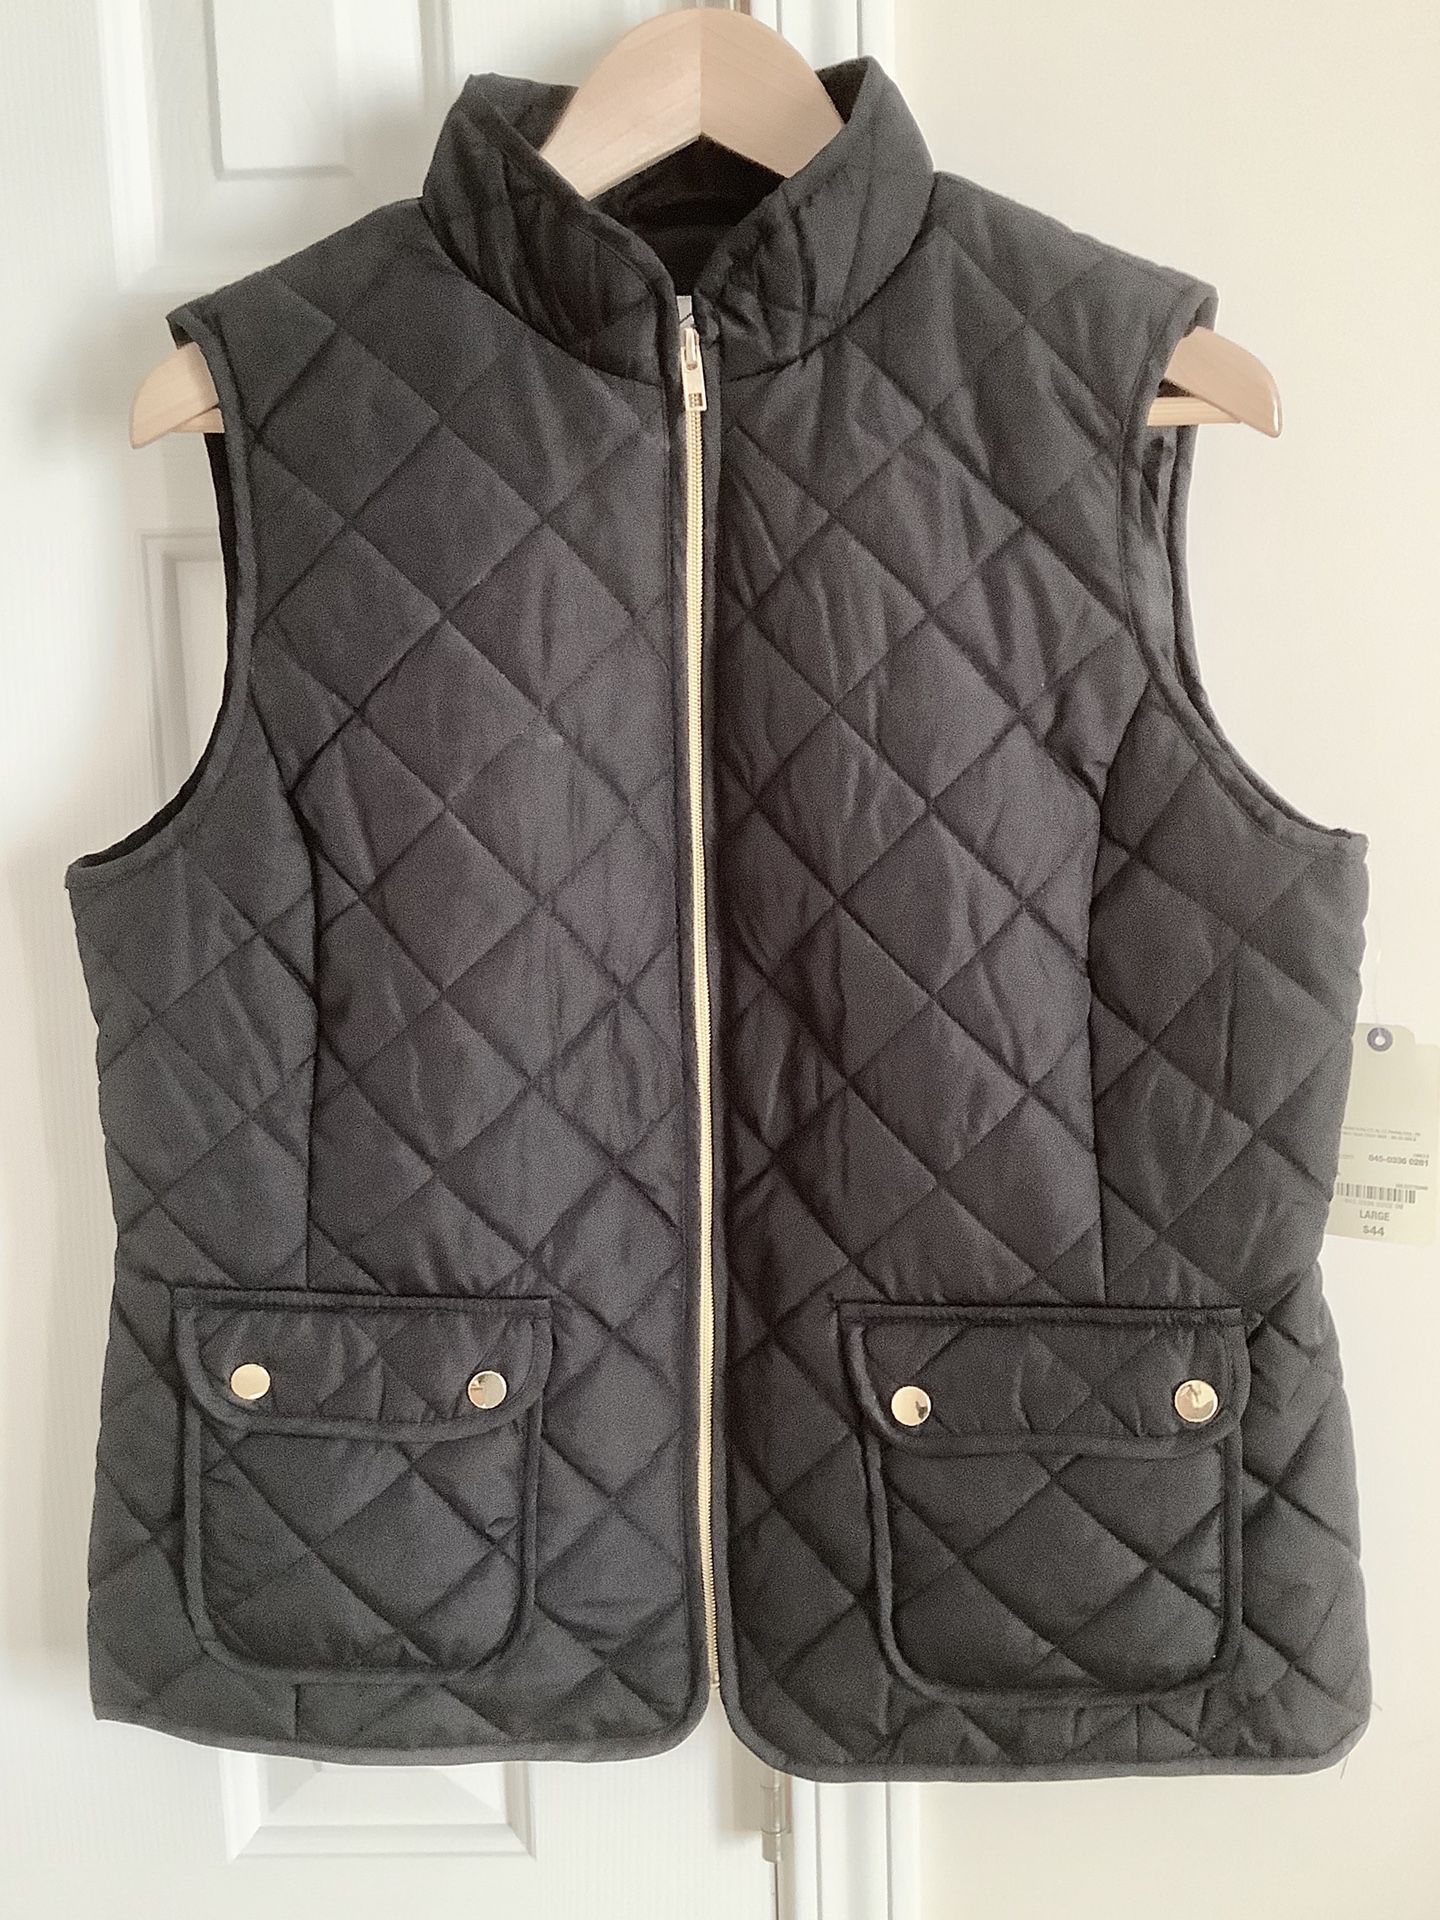 🎁 St John’s Bay Women Quilted Vest Large Black w/ Gold Full Zip Pockets NWT $44